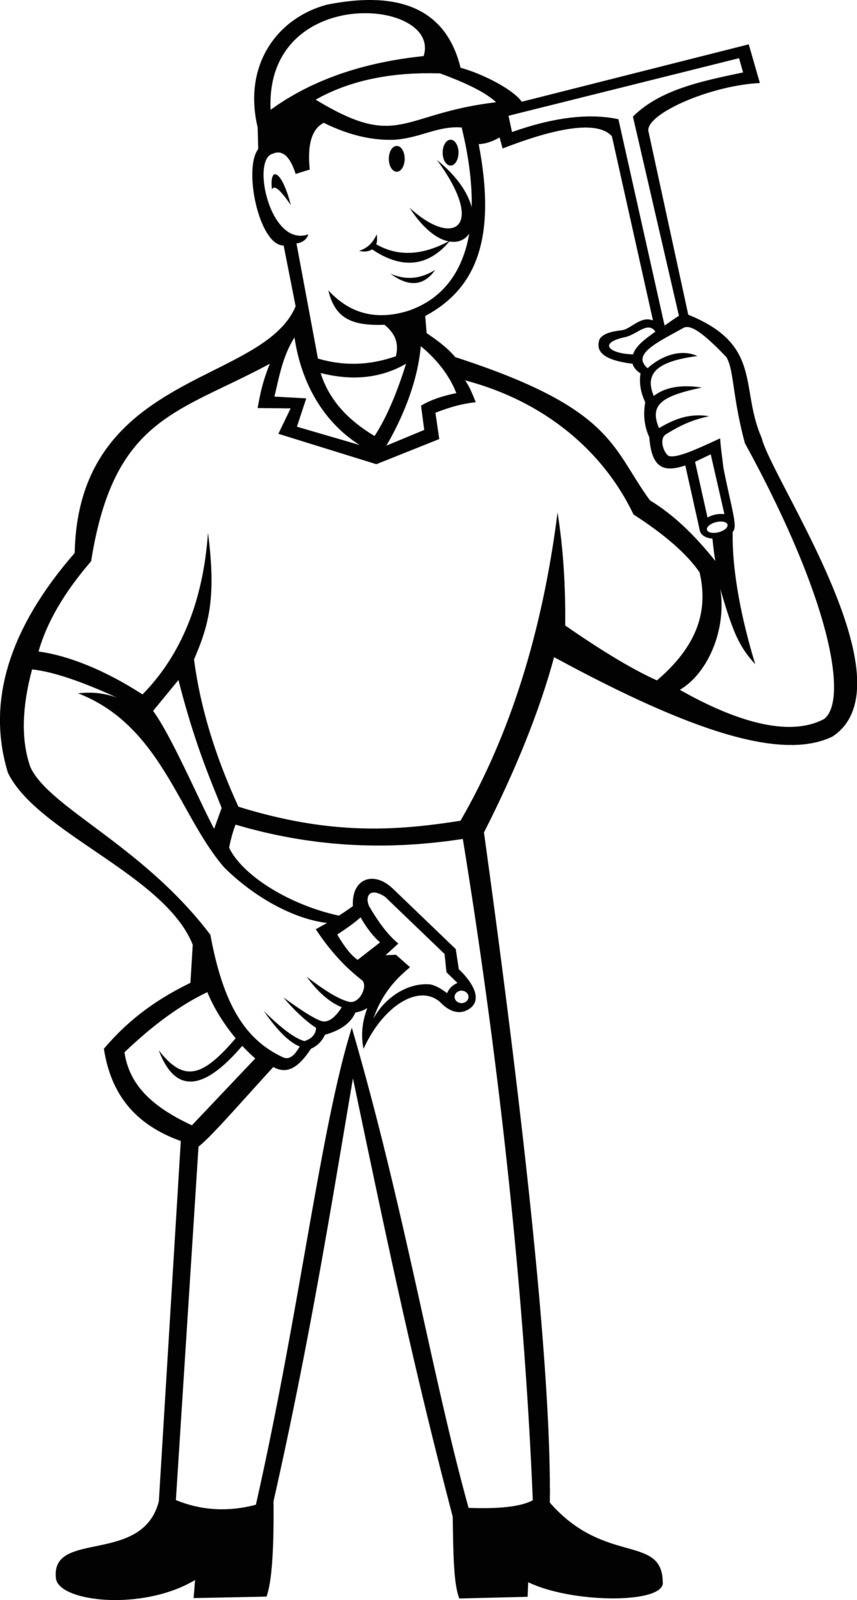 Black and white illustration of window cleaner with squeegee and spray bottle on isolated background done in cartoon style.